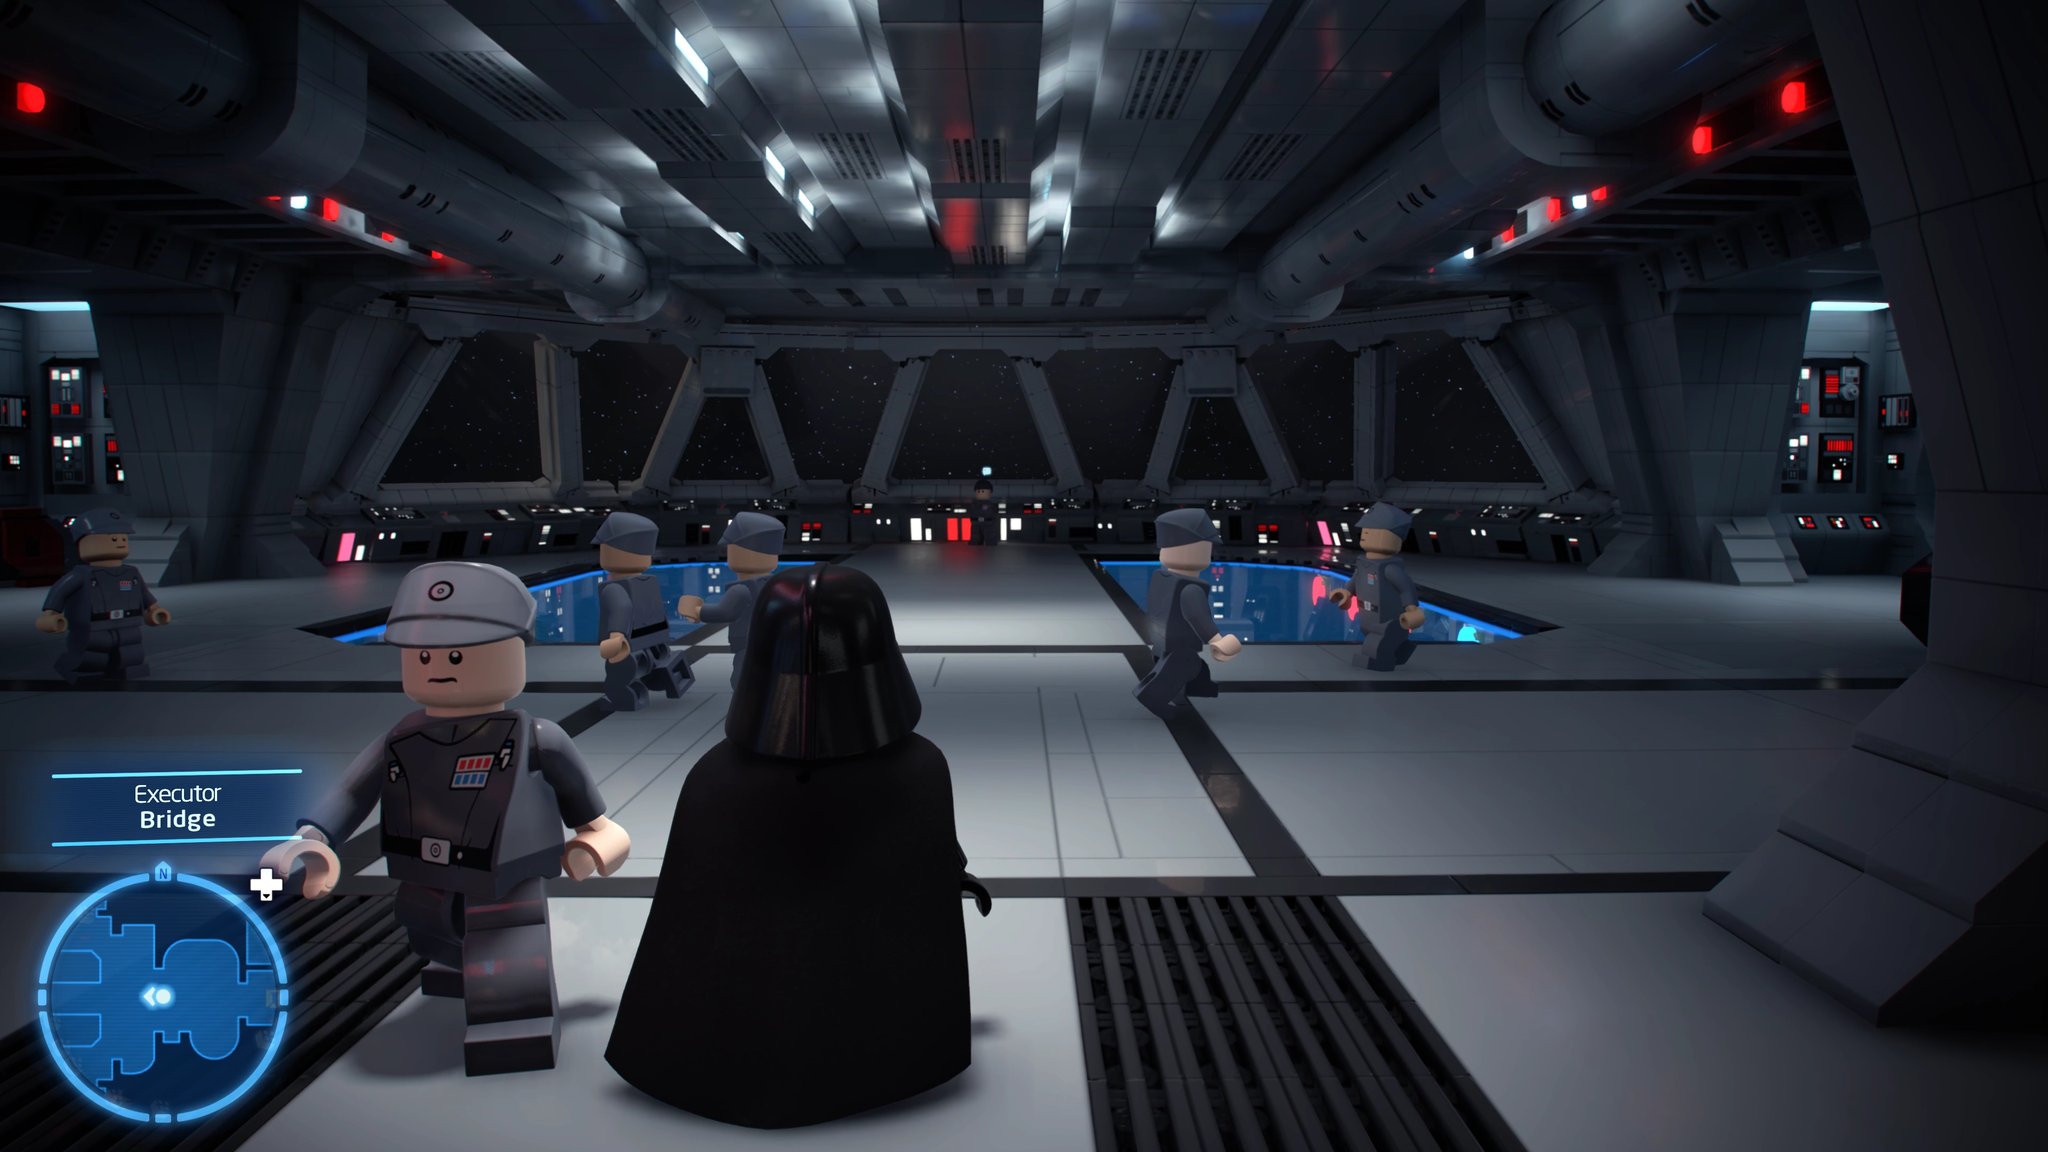 RuggedEagle on X: "This interior is next level stuff 😏  #LegoStarWarsTheSkywalkerSaga Wanna know how to unlock all capital ships  just uploaded a vid showcasing them all 😎 https://t.co/QGSKu6bUVM" / X